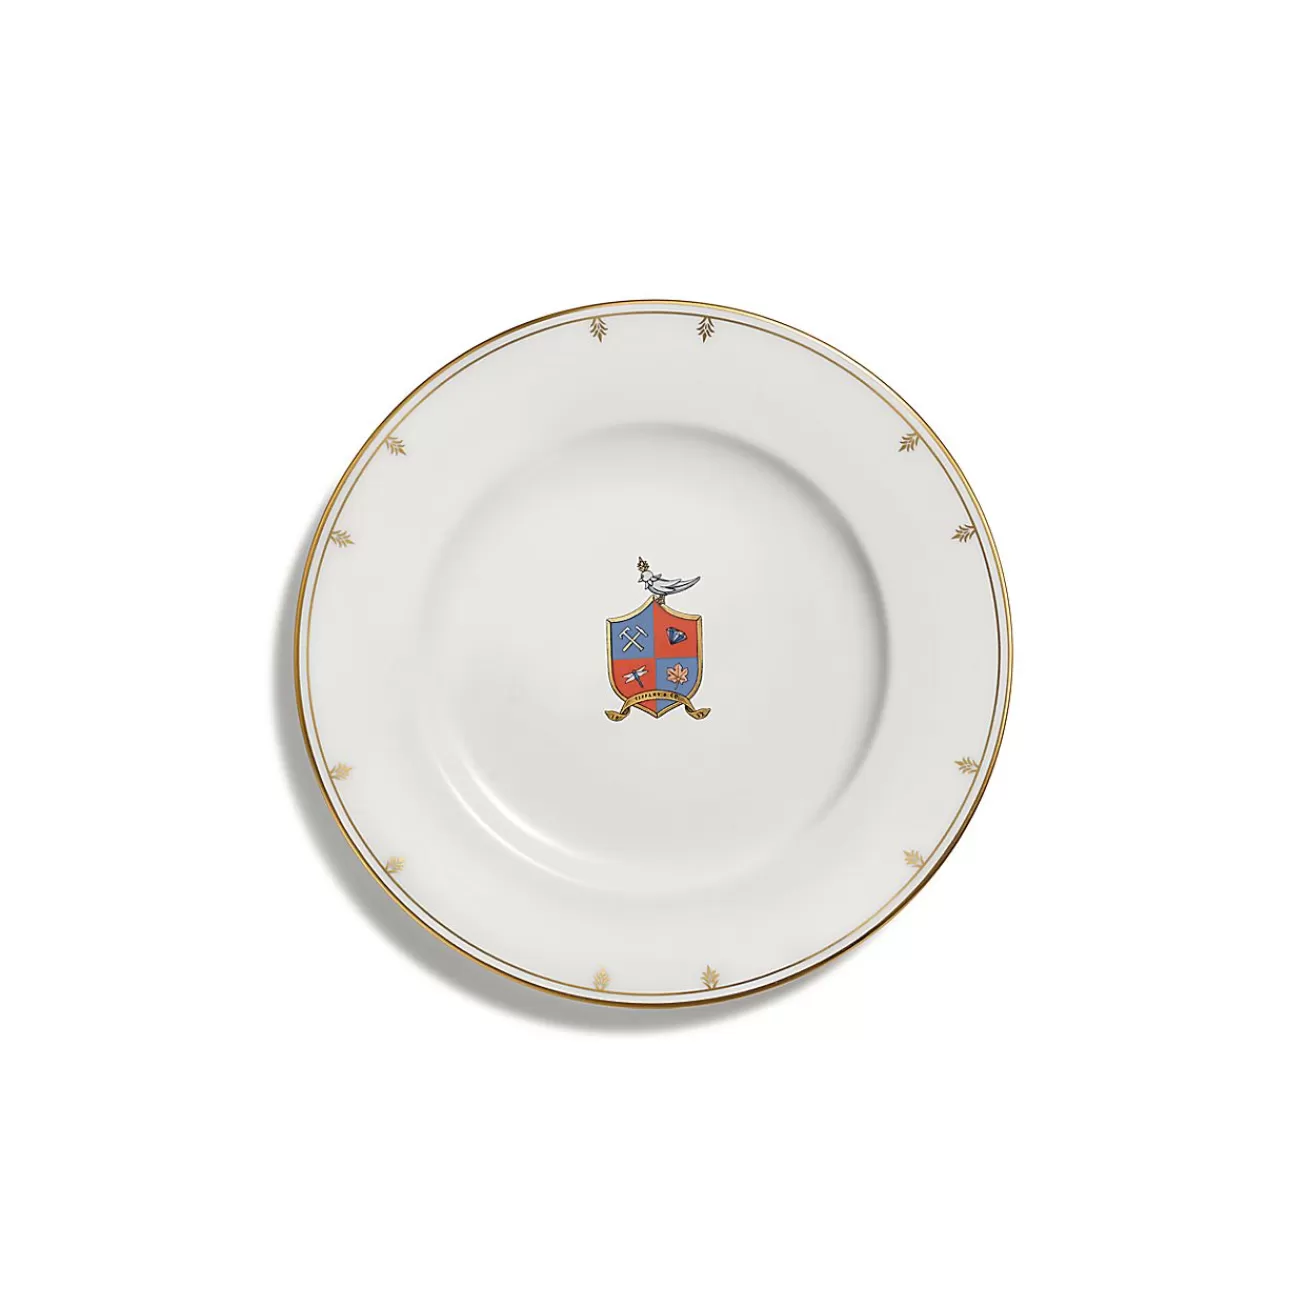 Tiffany & Co. Tiffany Crest Bread and Butter Plate in Bone China | ^ The Home | Housewarming Gifts